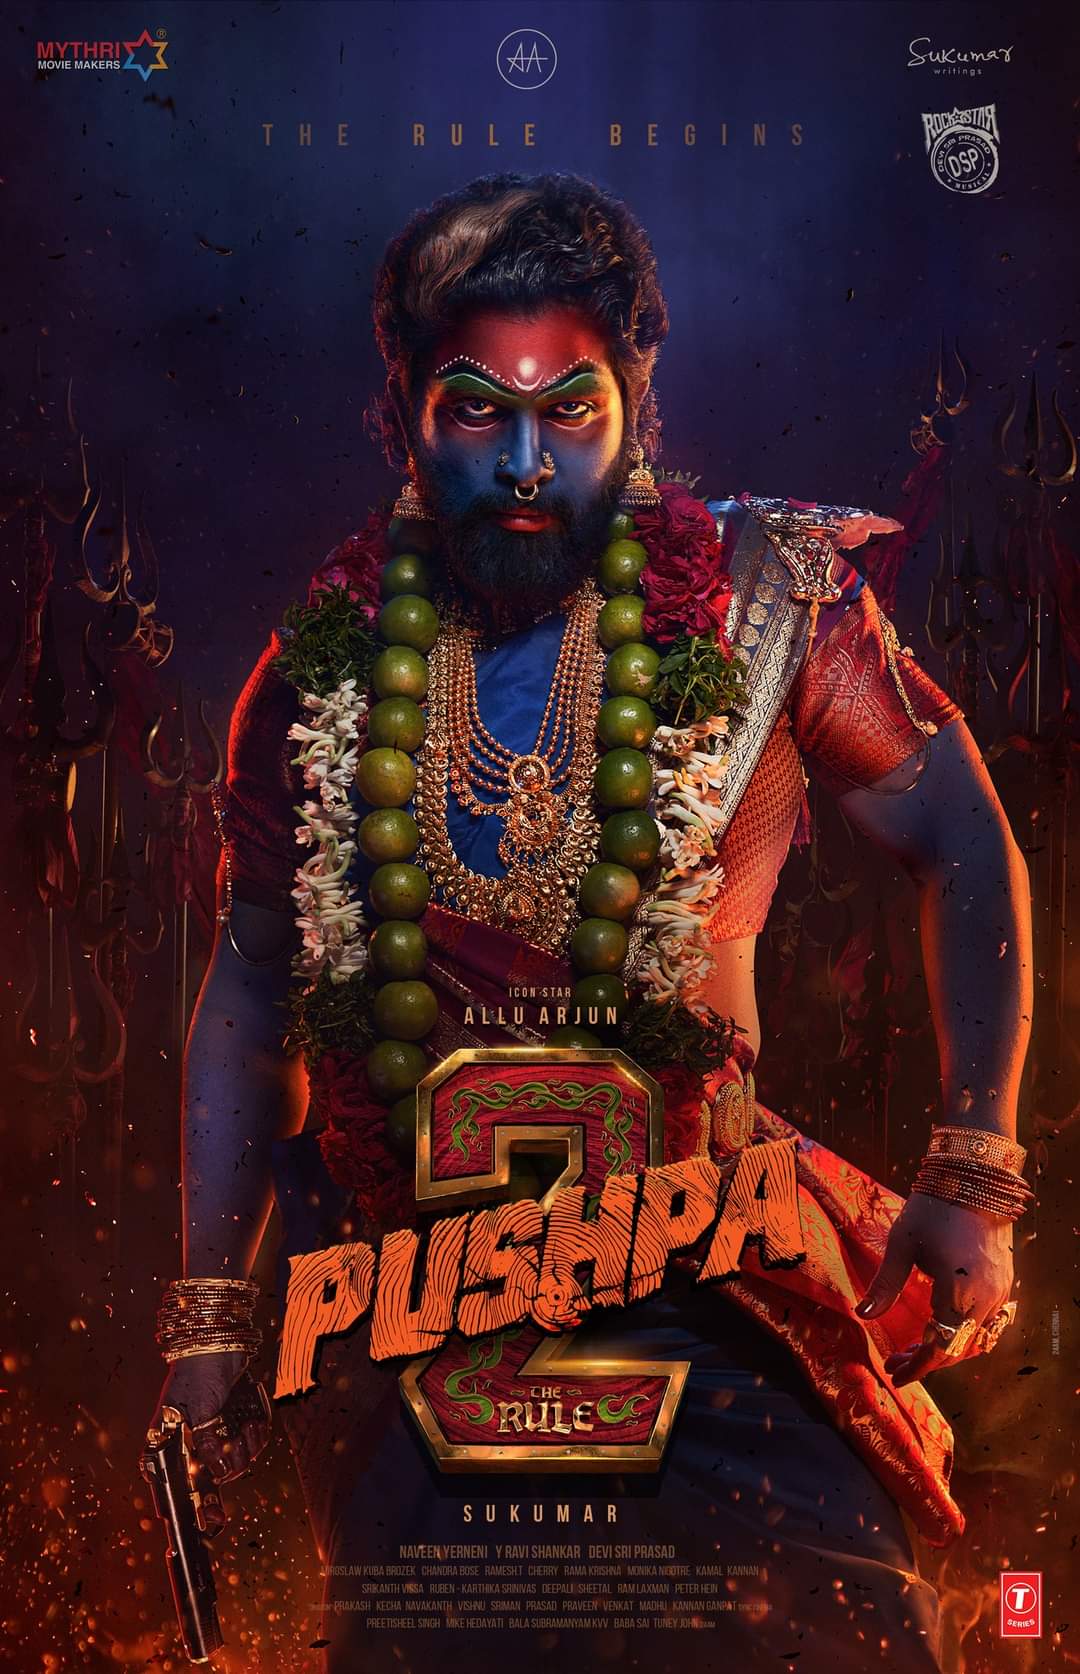 Allu Arjun’s new look in Pushpa 2: The Rule official poster 